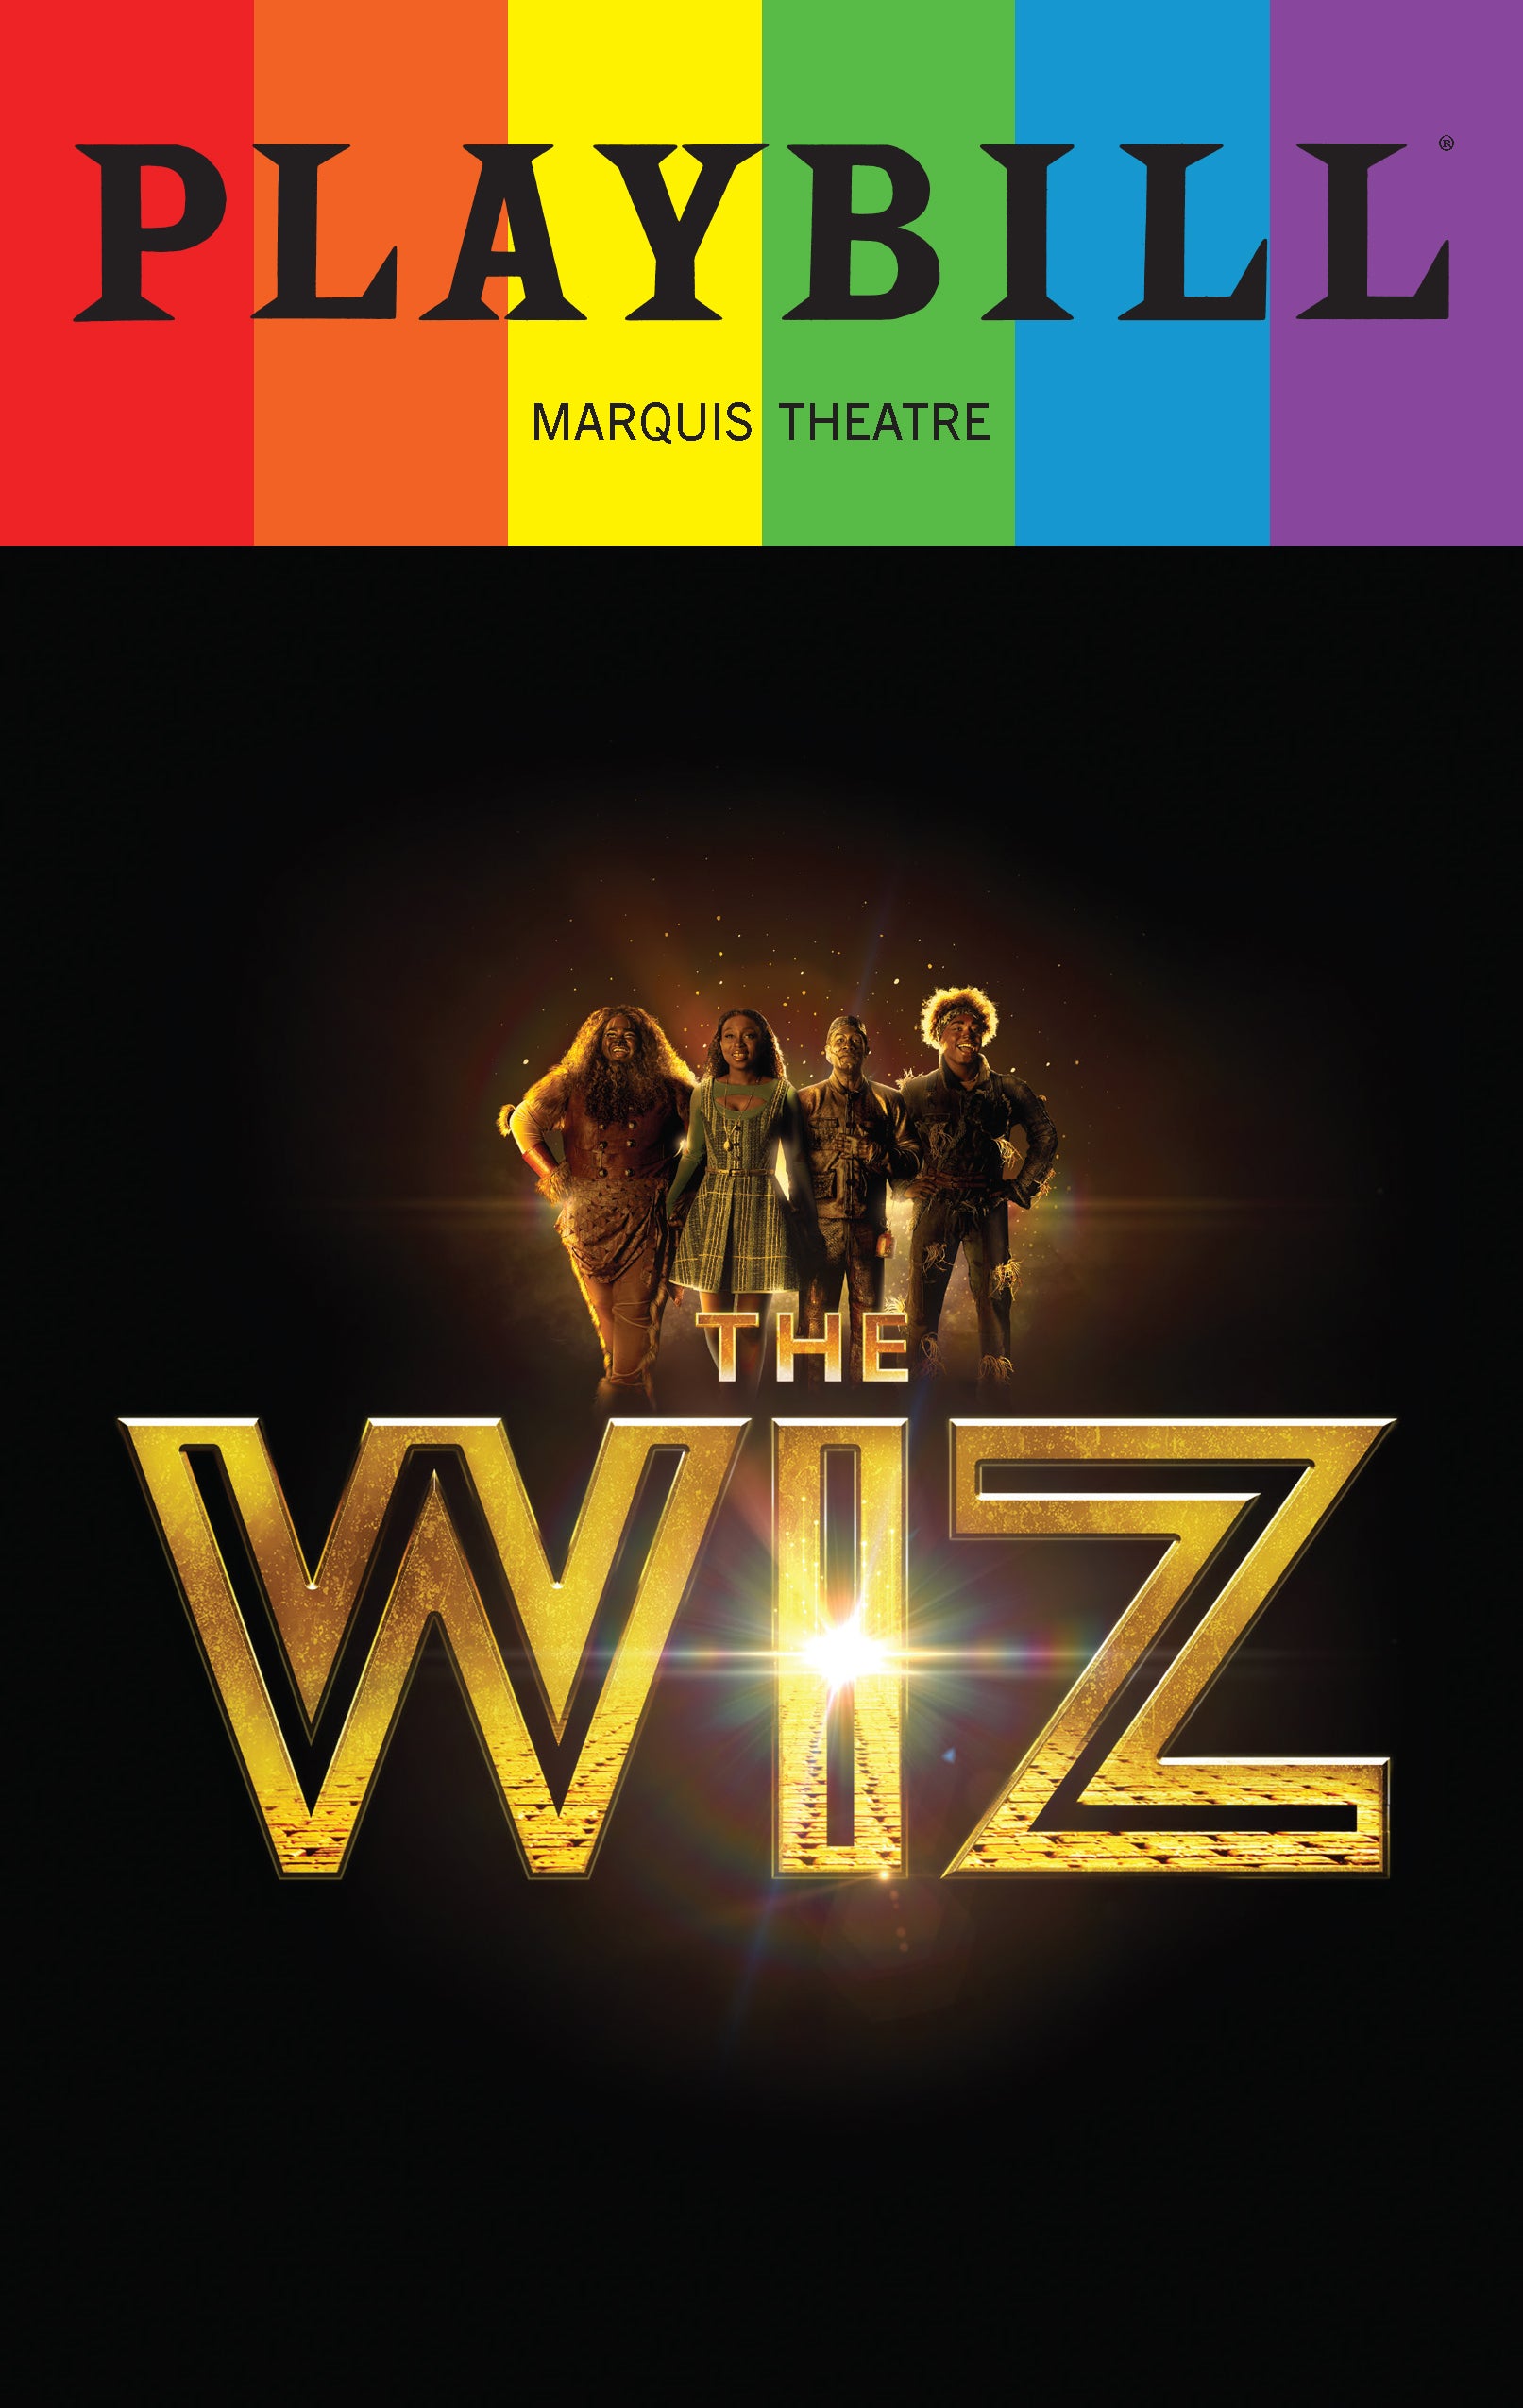 The Wiz 2024 Revival Playbill with Limited Edition Rainbow Pride Logo